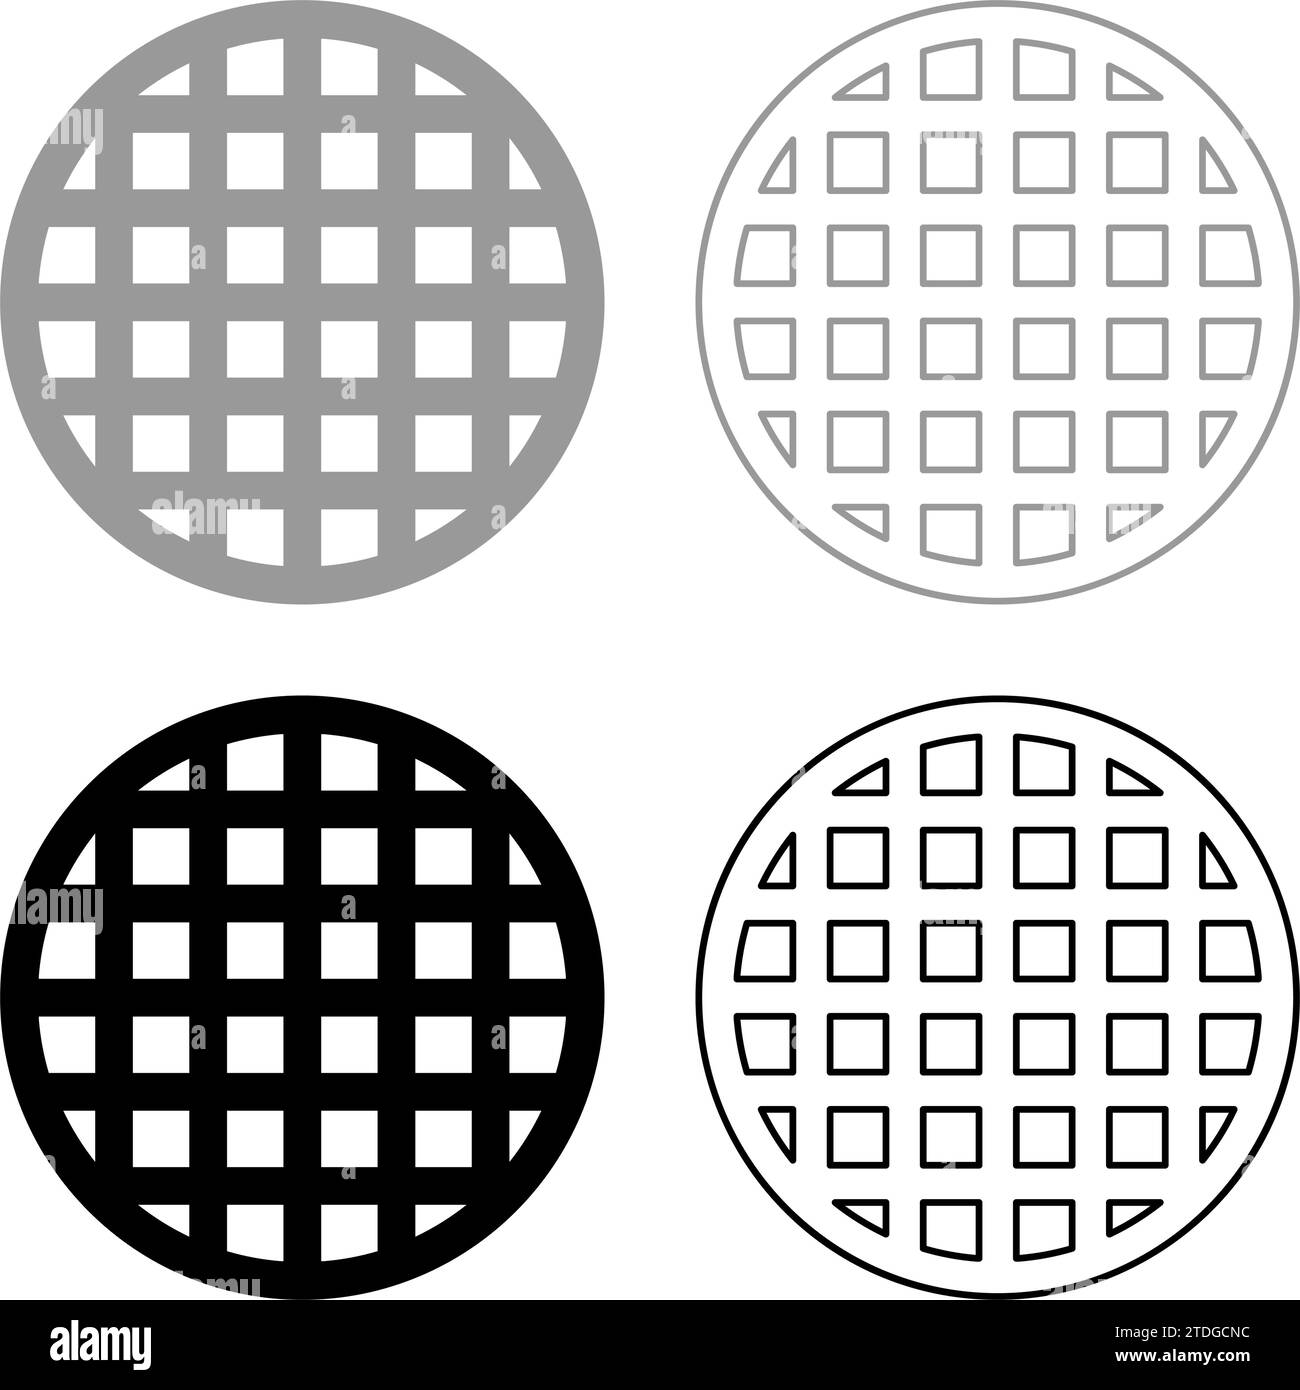 Grating grate lattice trellis net mesh BBQ grill grilling surface round shape set icon grey black color vector illustration image simple solid fill Stock Vector